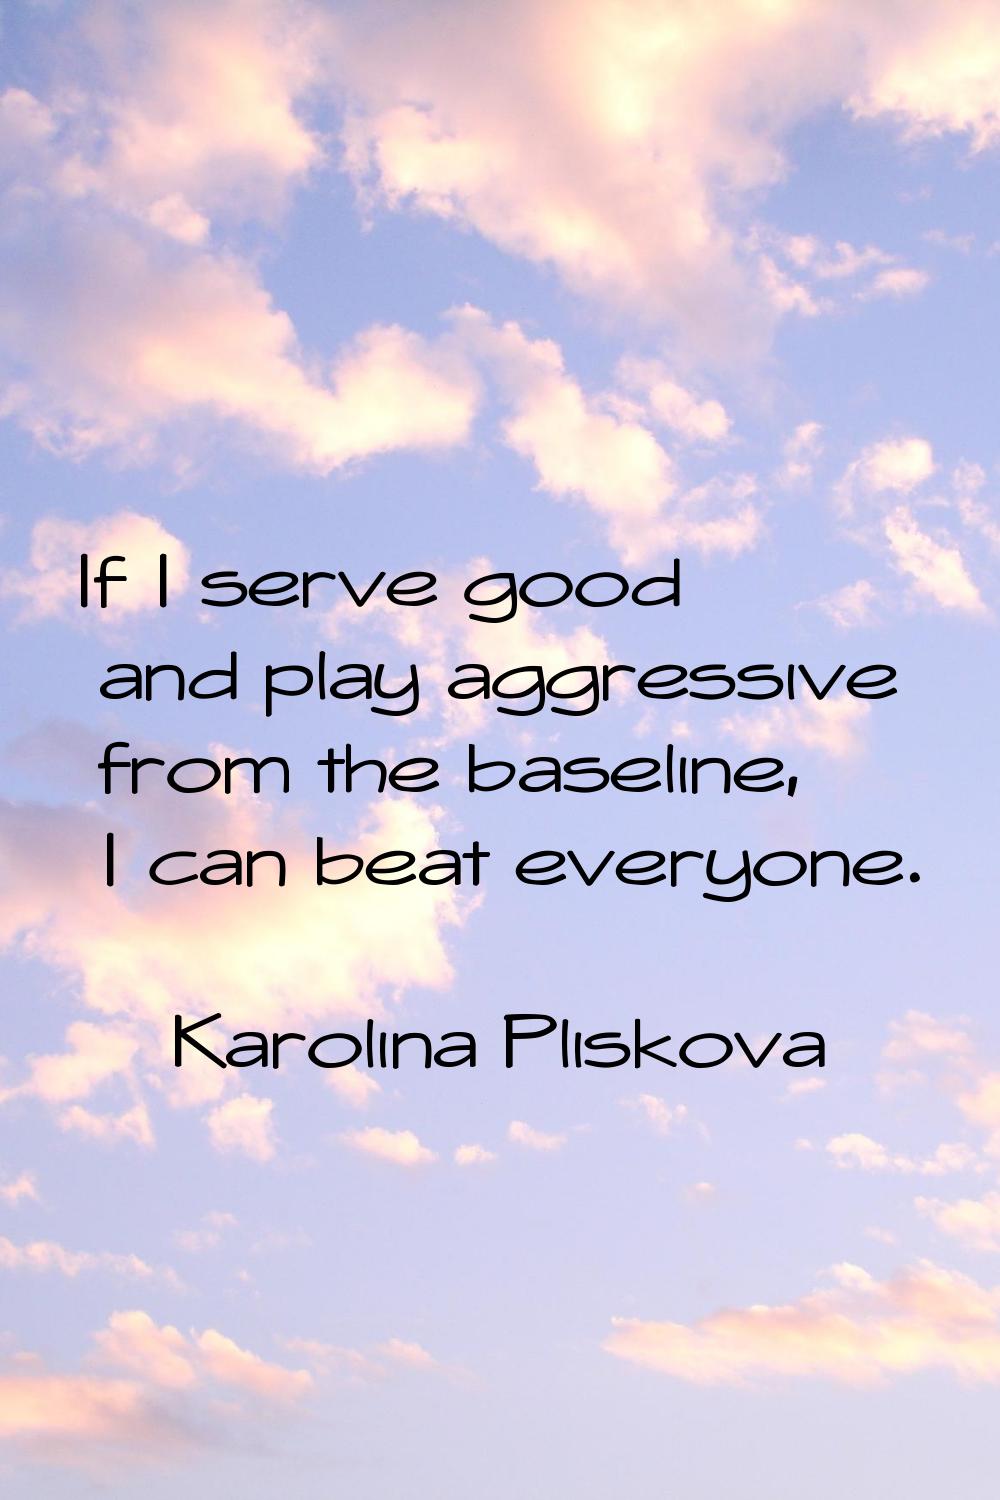 If I serve good and play aggressive from the baseline, I can beat everyone.